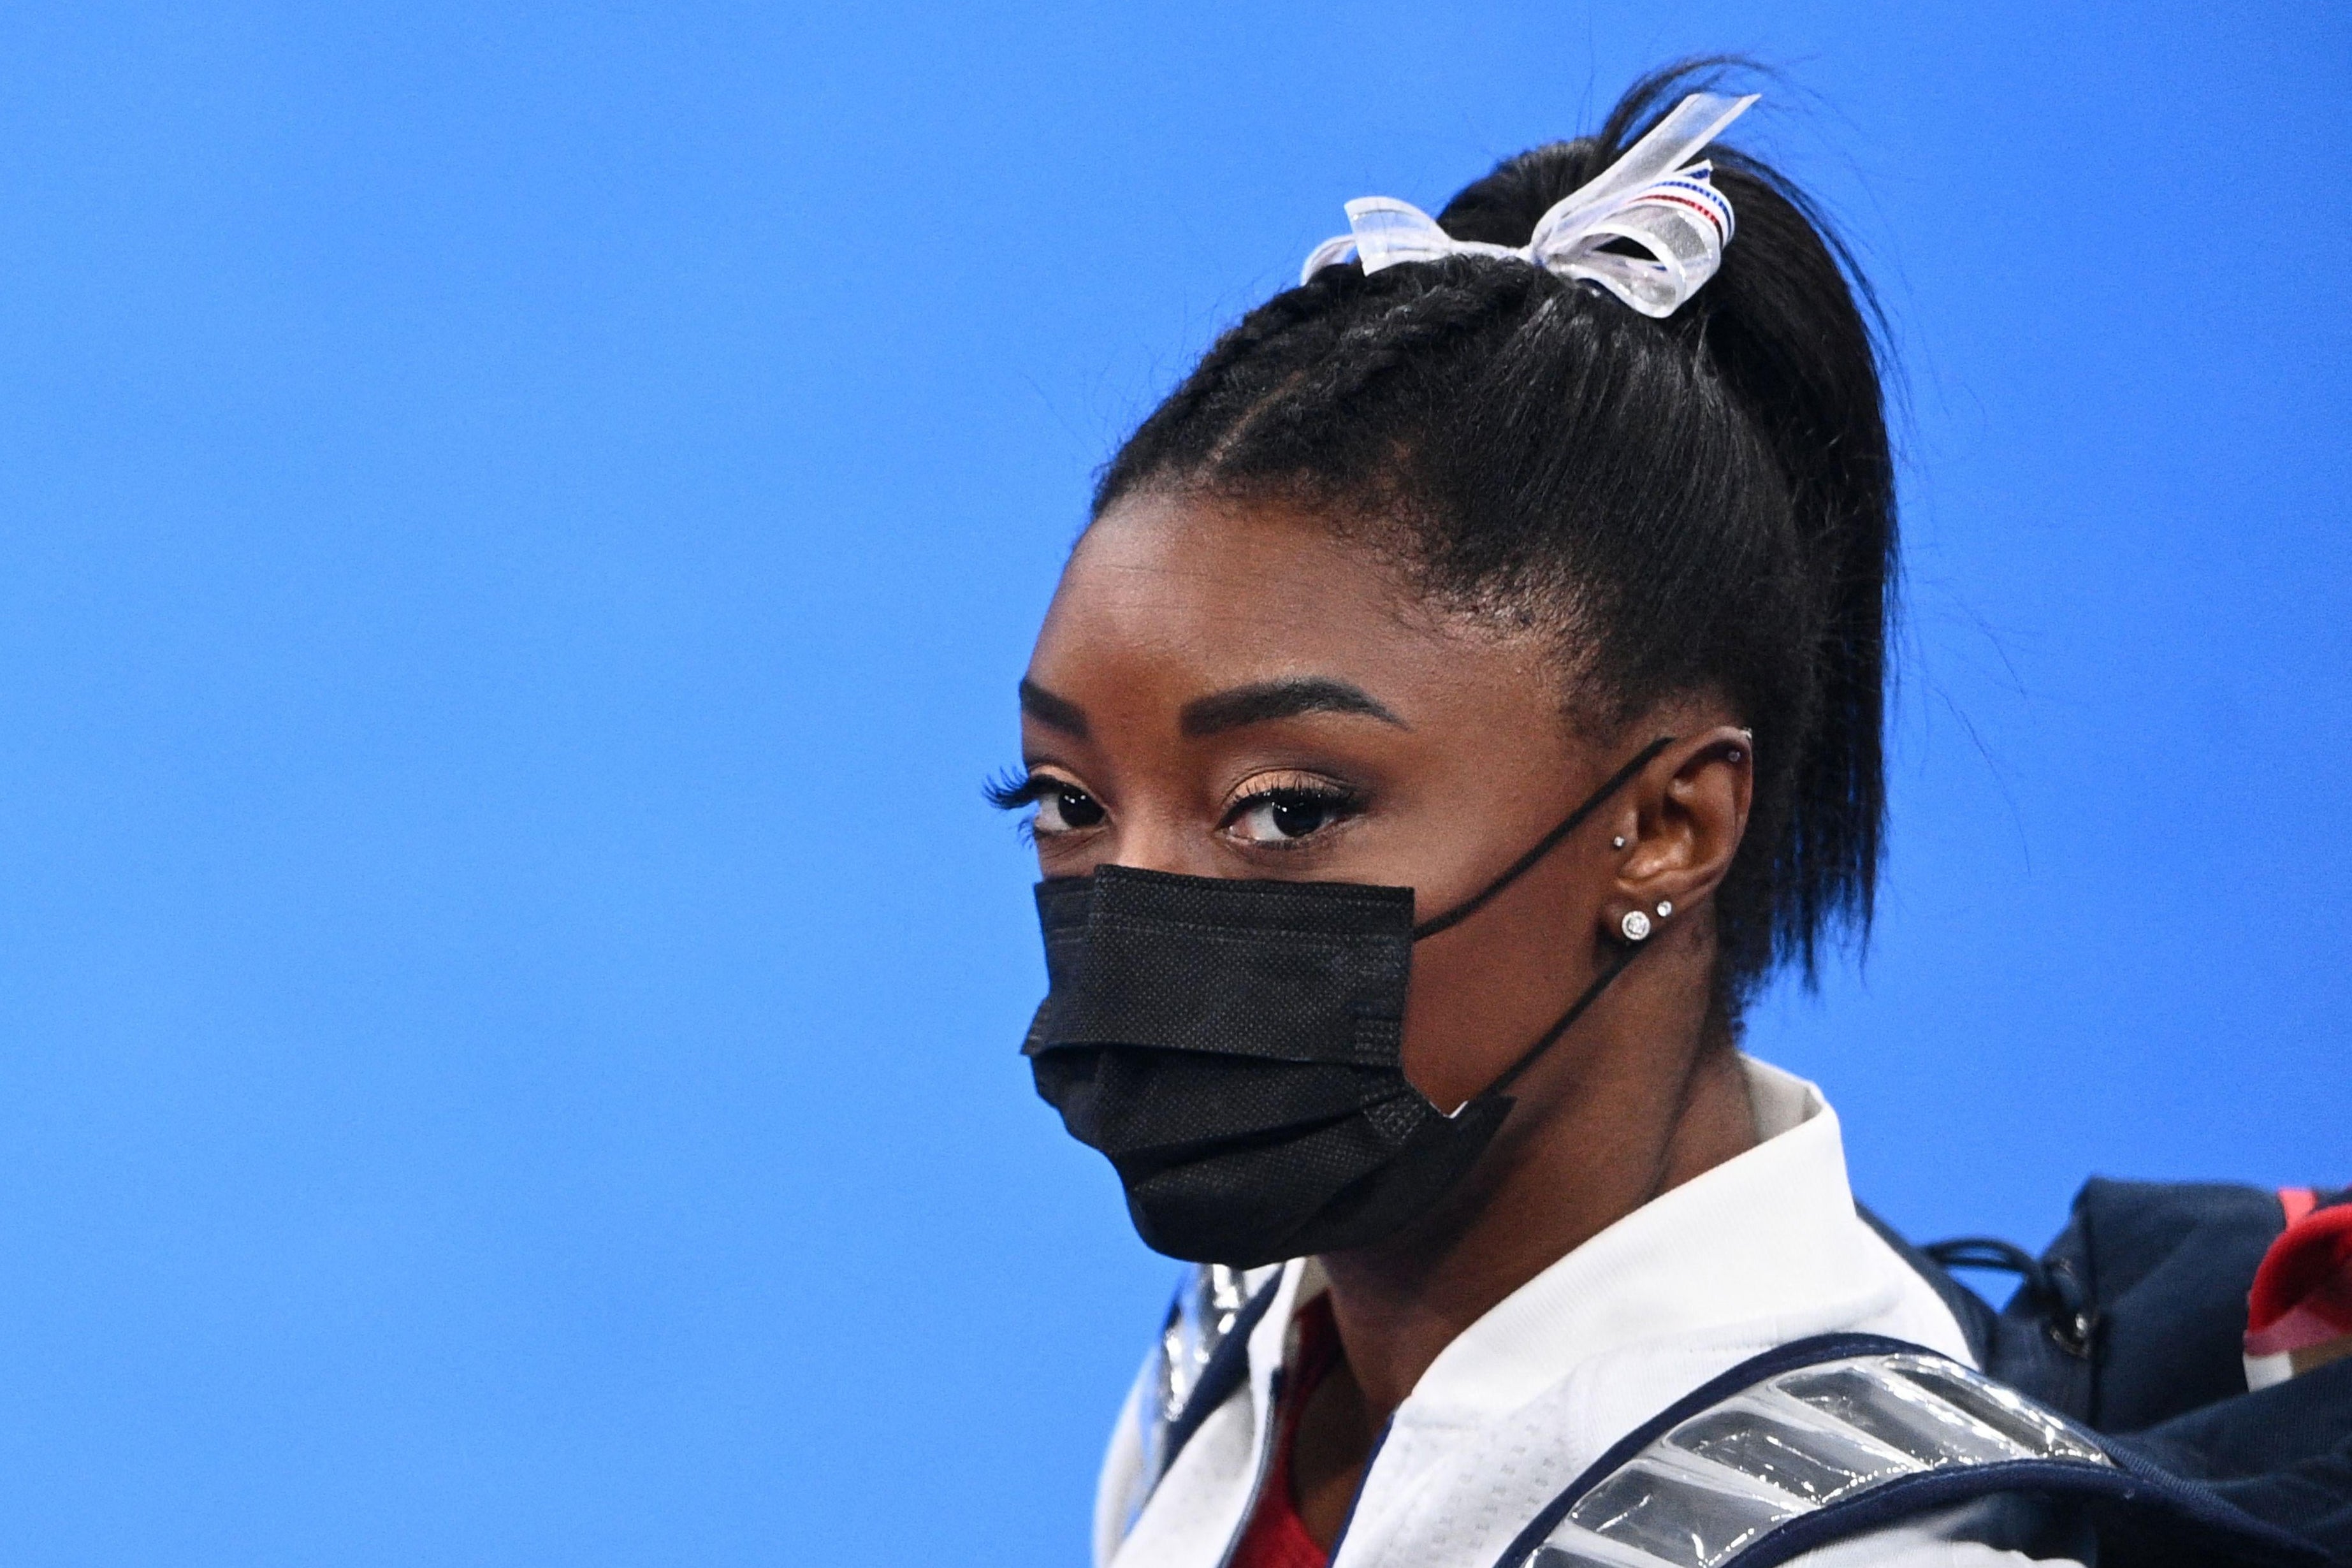 Biles in a mask looking stonefaced